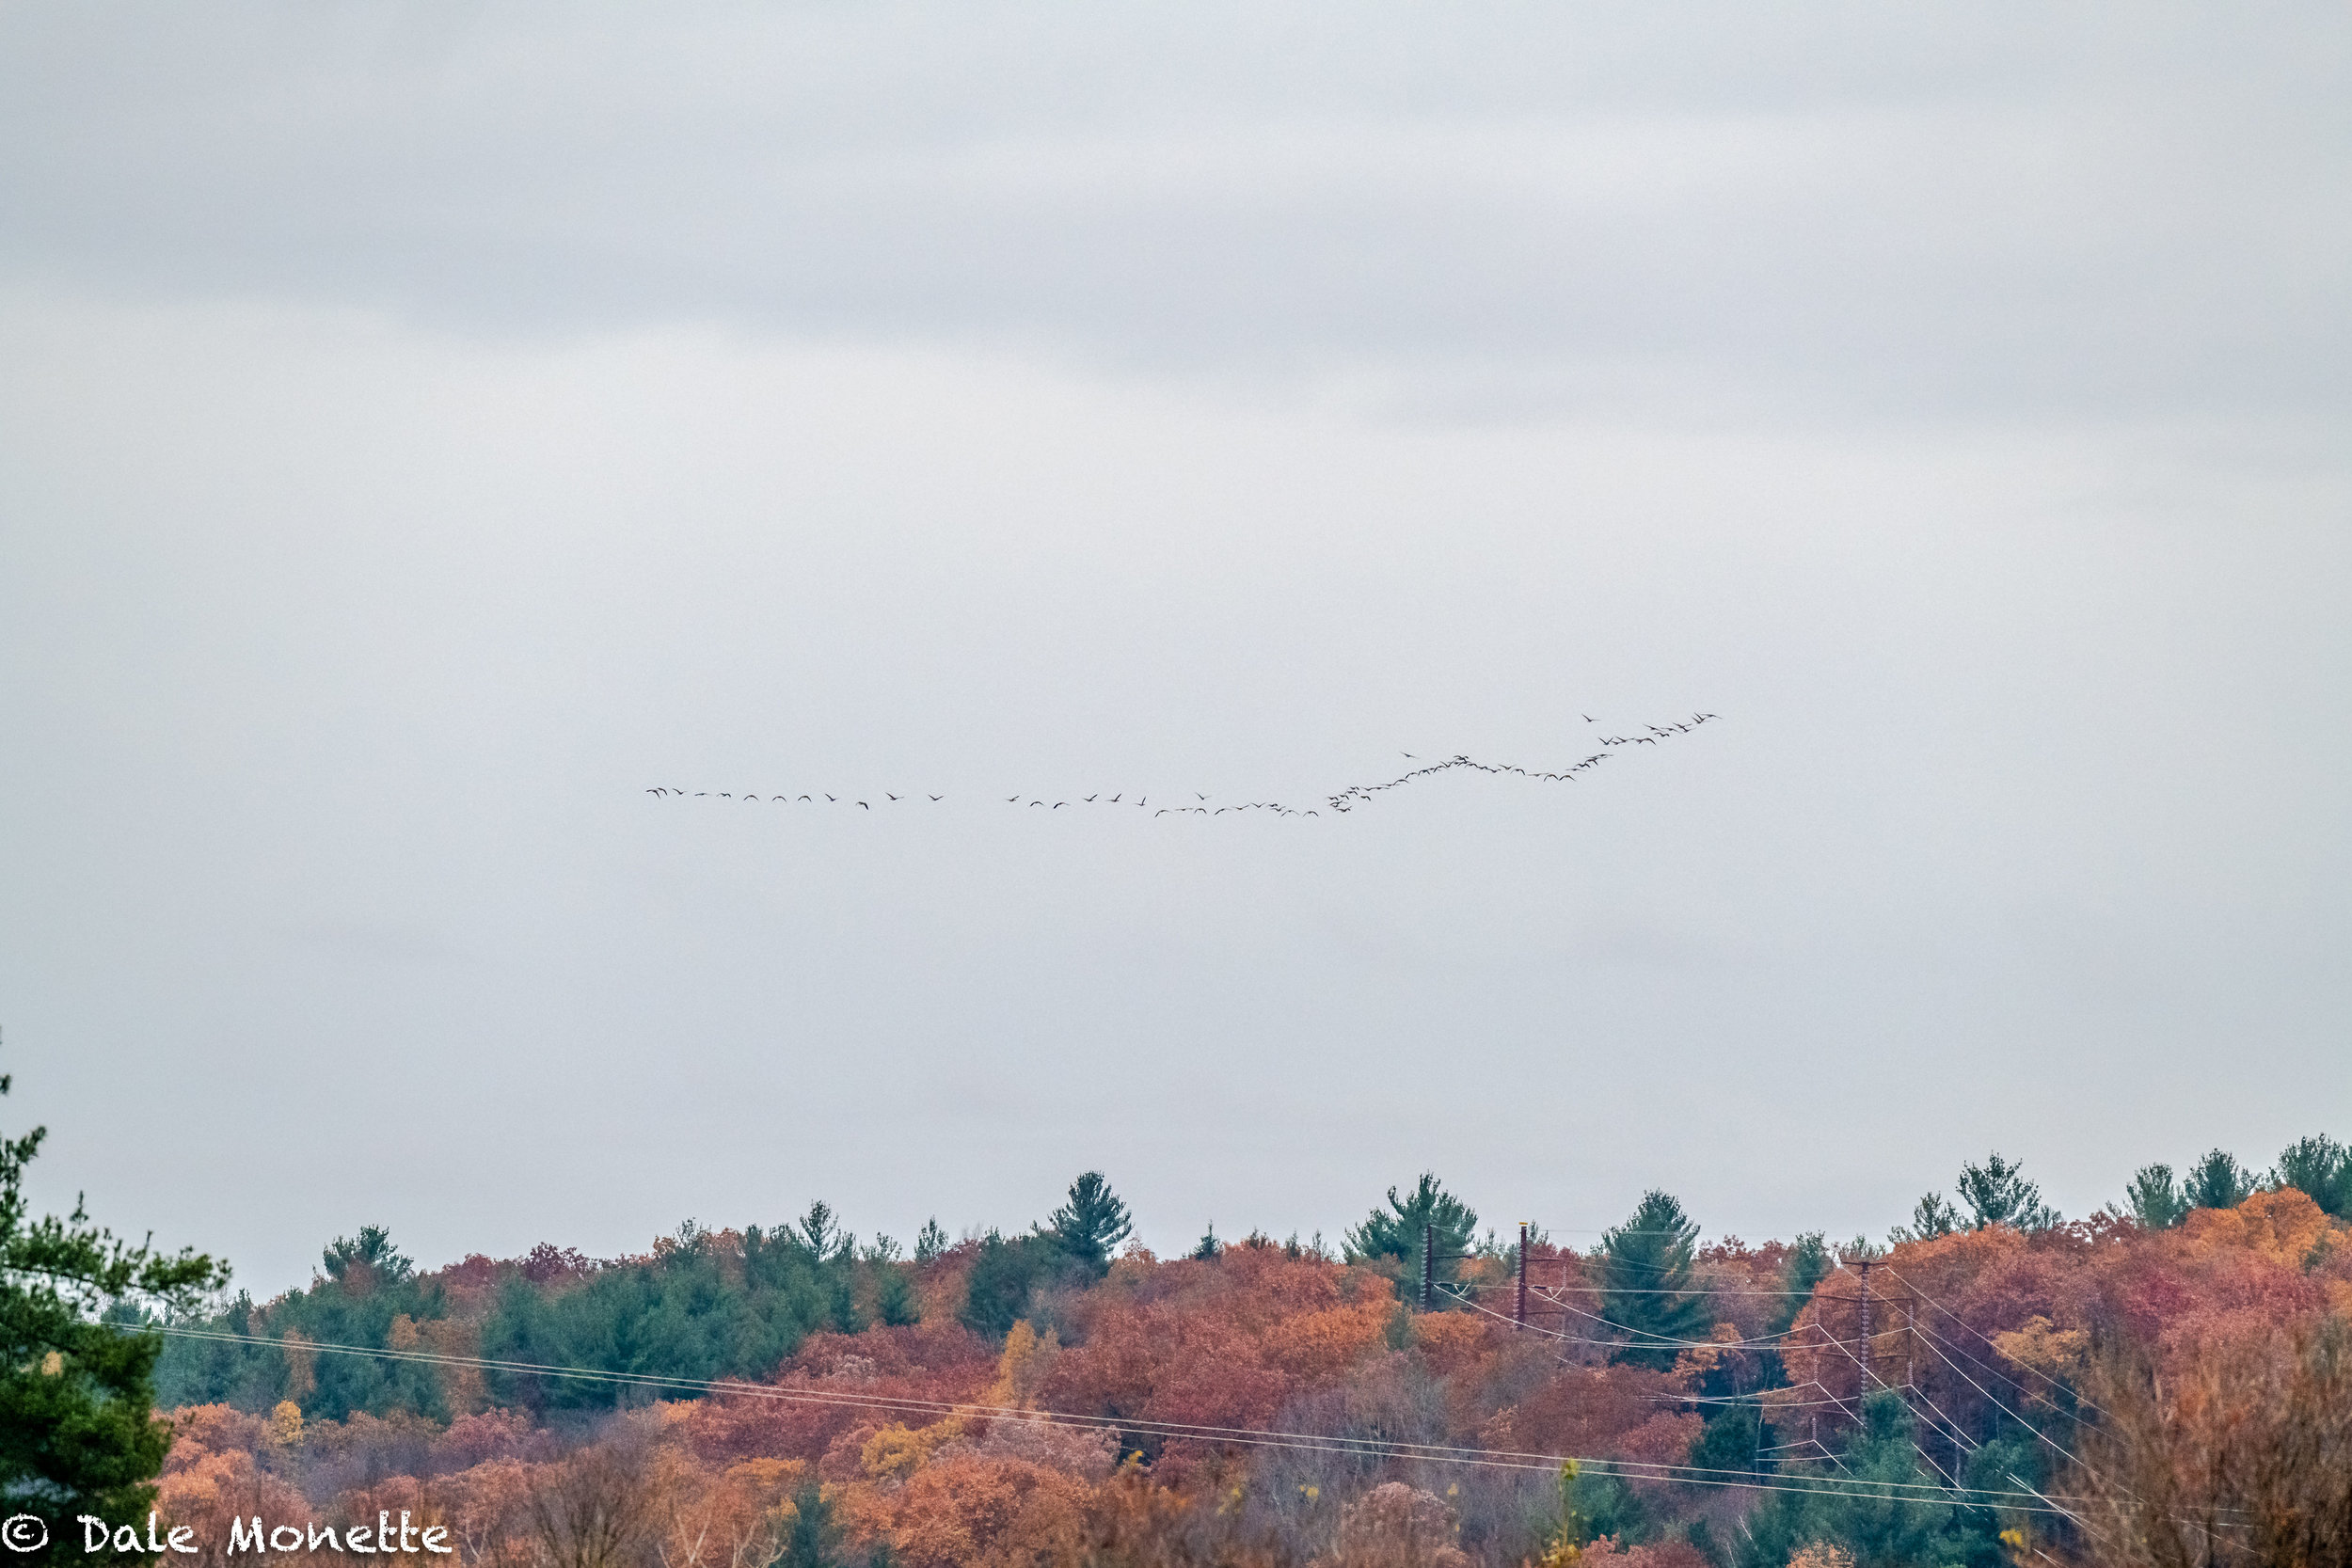   And there go the Canada geese………. southbound.  